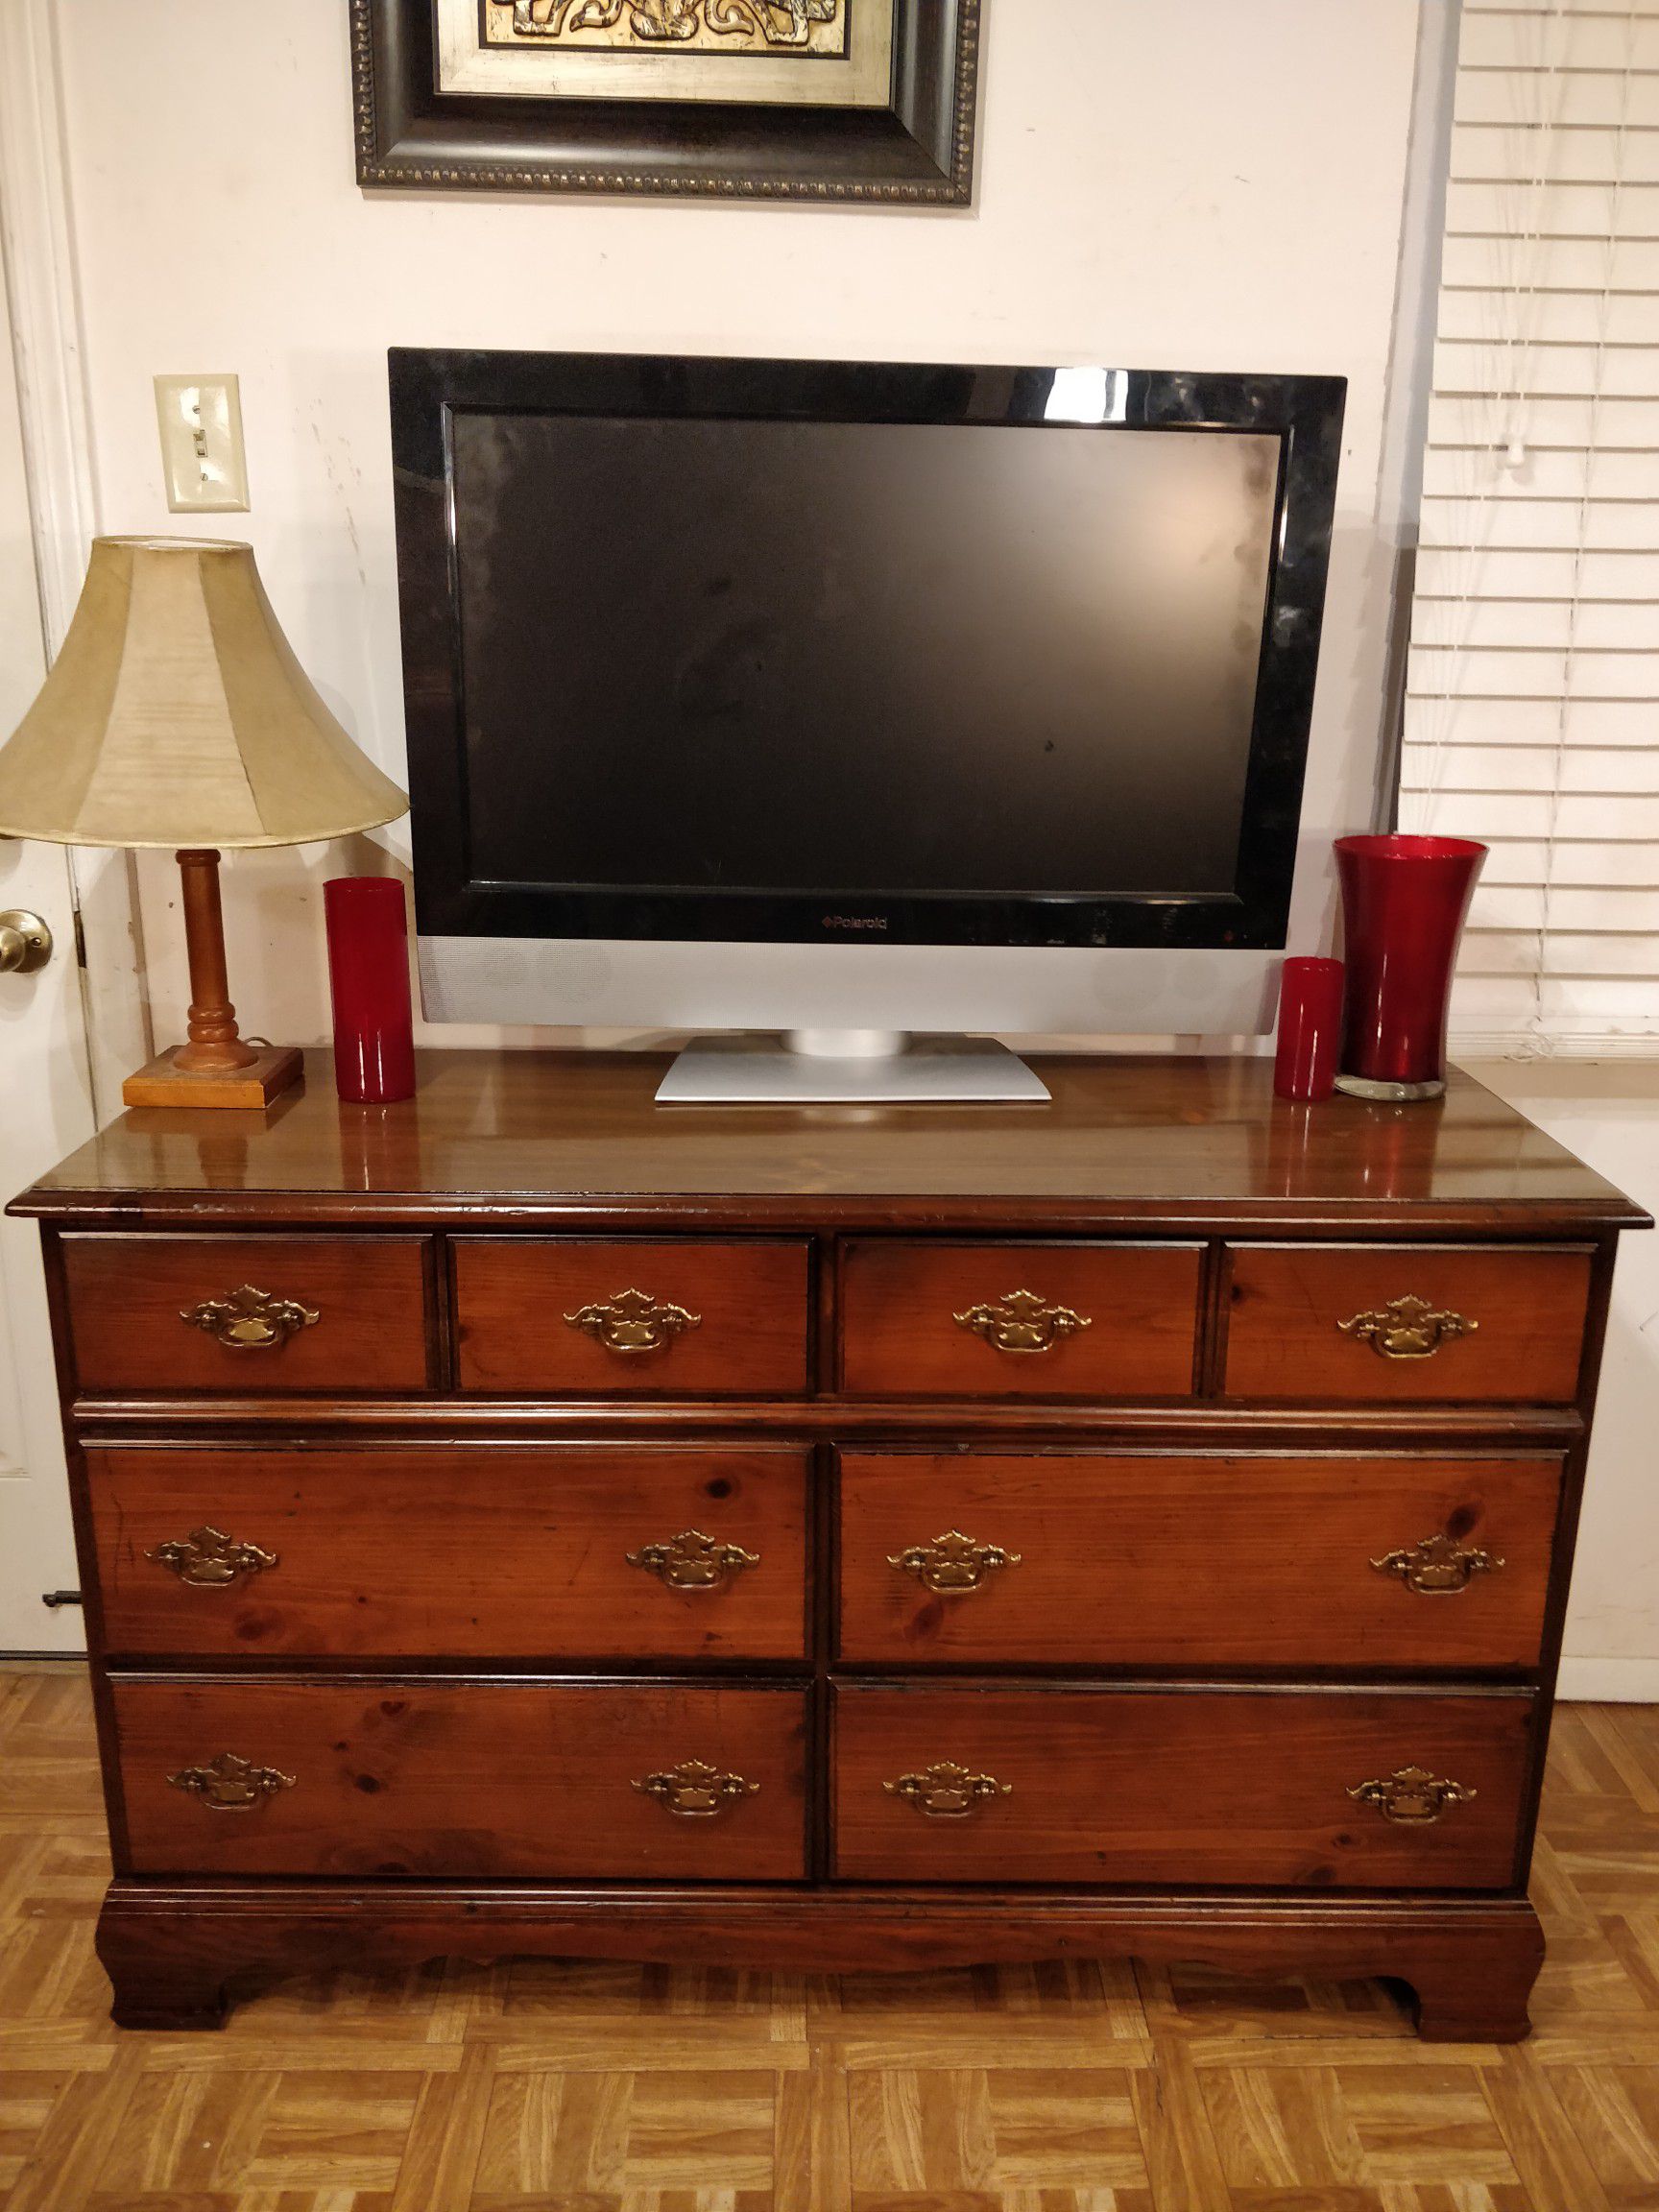 Nice solid wood dresser with drawers in good condition, all drawers sliding smoothly. L50"*W18"*H31.2"